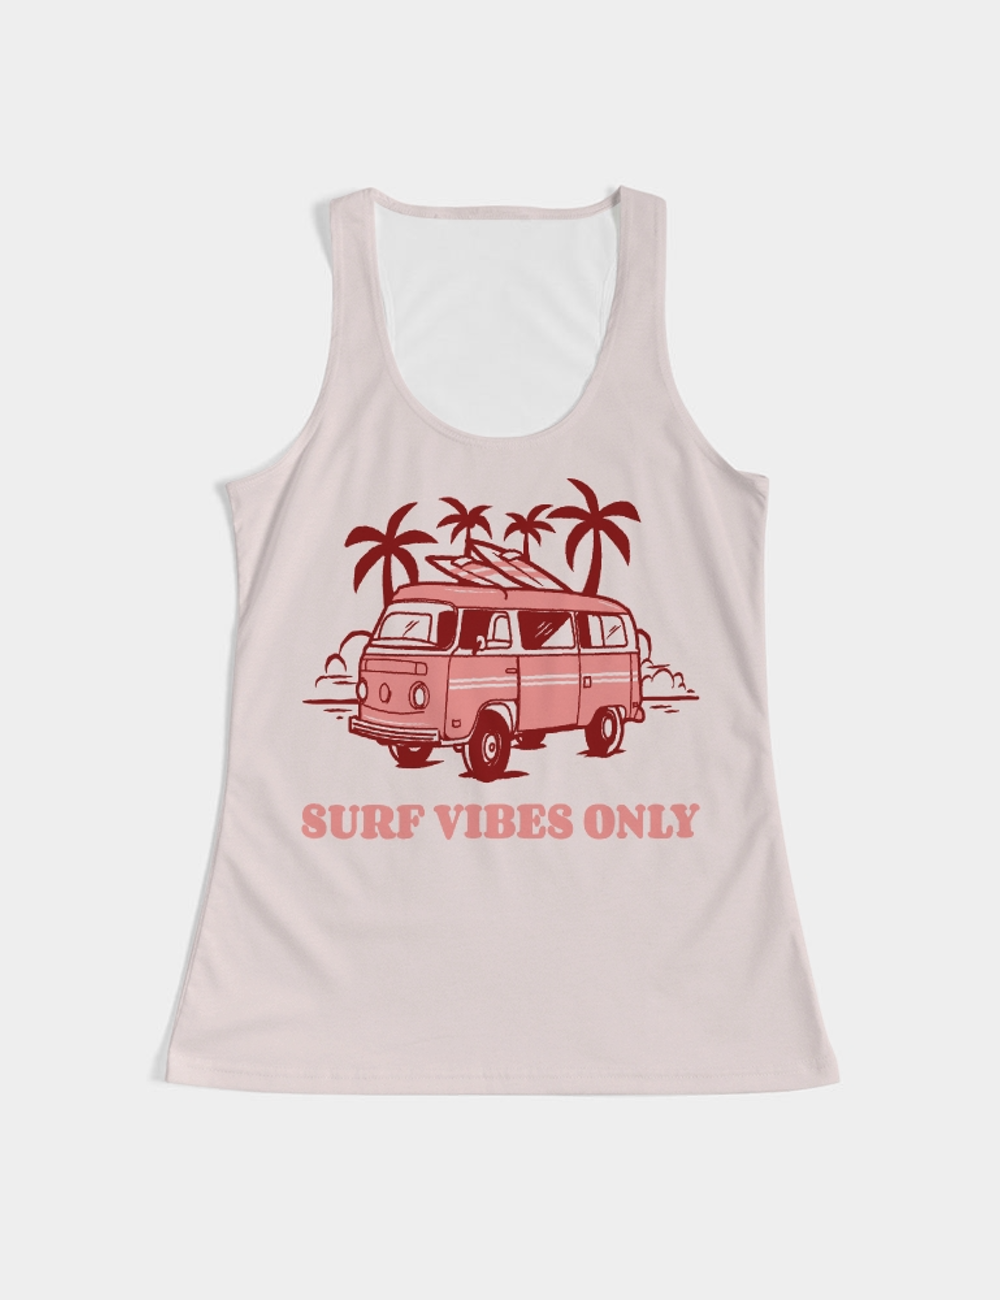 Surf Vibes Only | Women's Premium Fitted Tank Top OniTakai